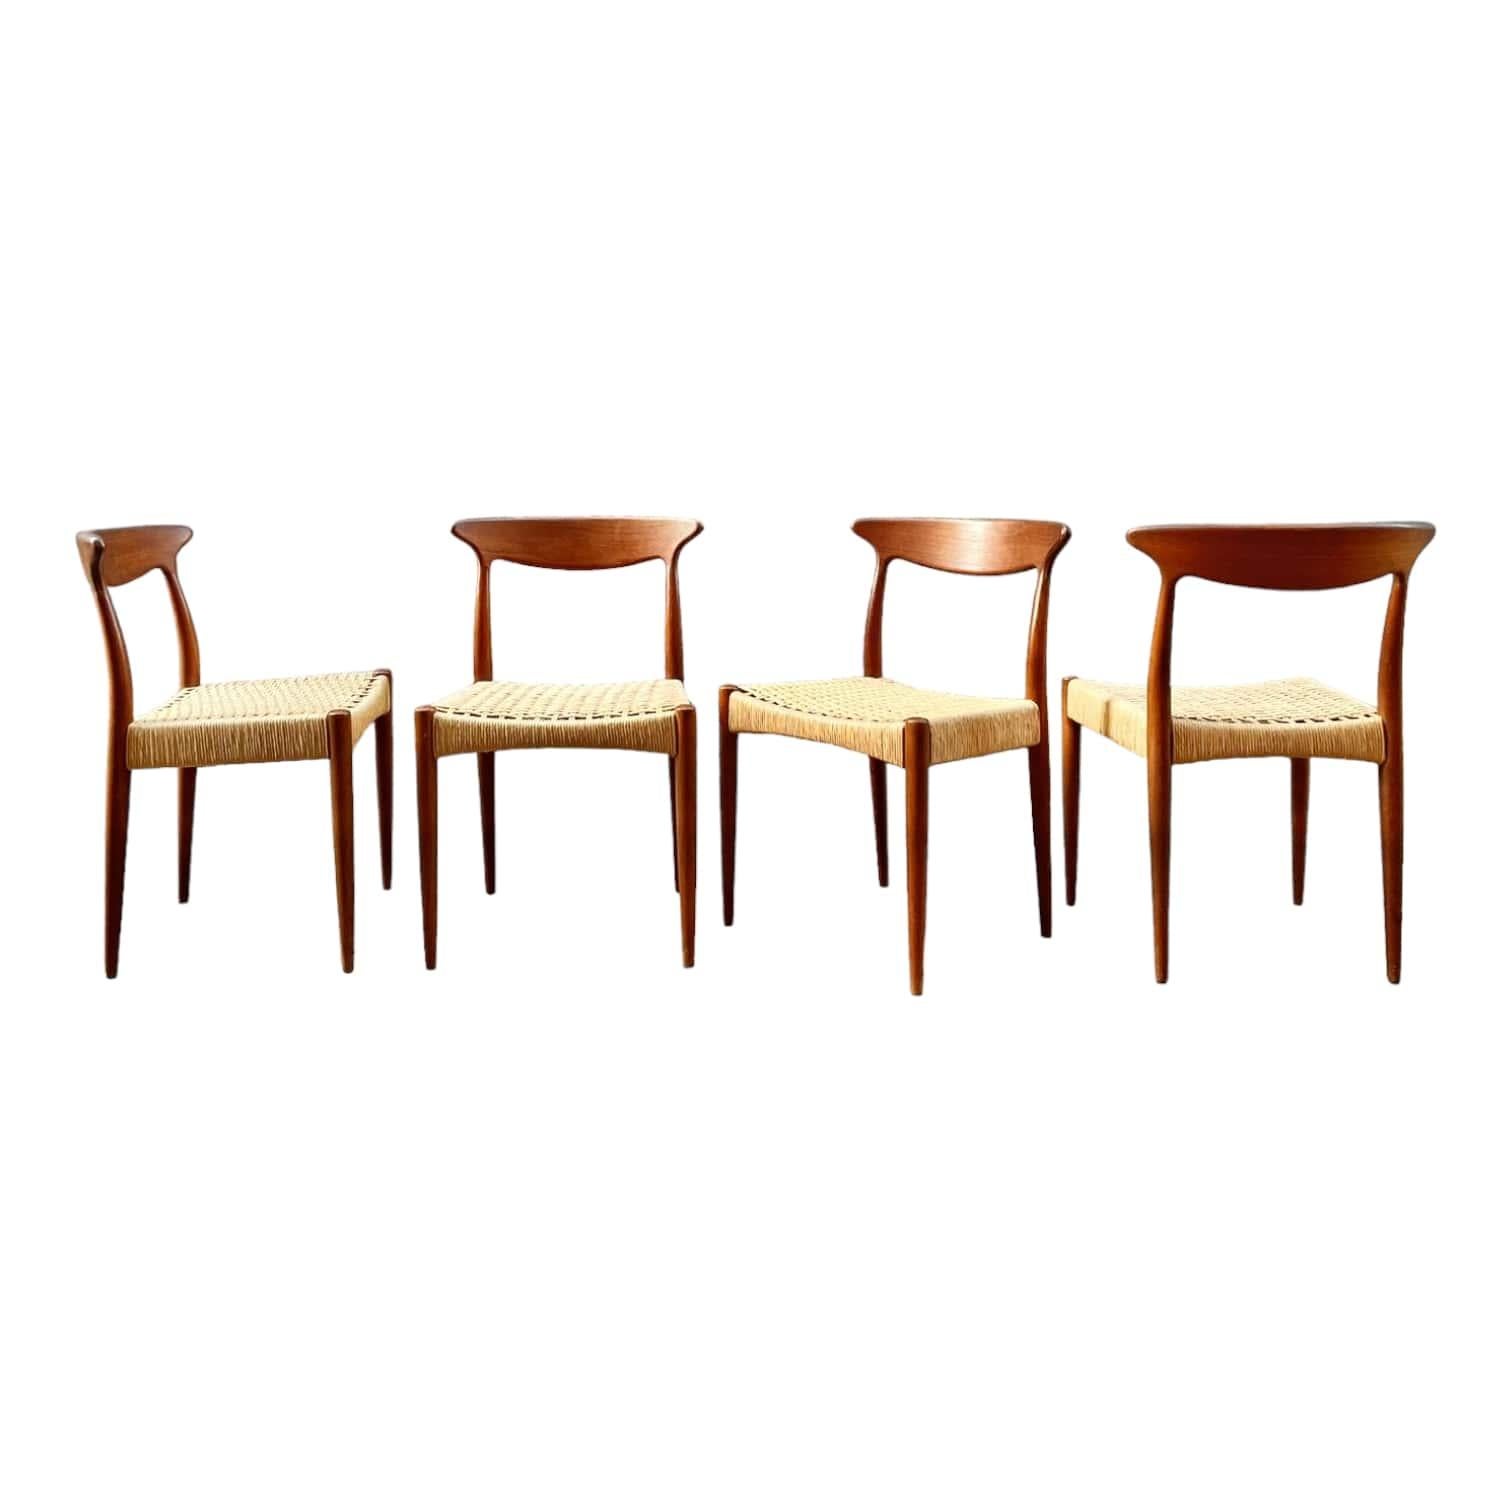 Discover this magnificent series of 4 Danish teak chairs designed by Arne Hovmand Olsen, dating from the 1960s. These chairs are true Danish antiques which will bring a touch of charm and elegance to your interior. With a seat height of 45 cm, they